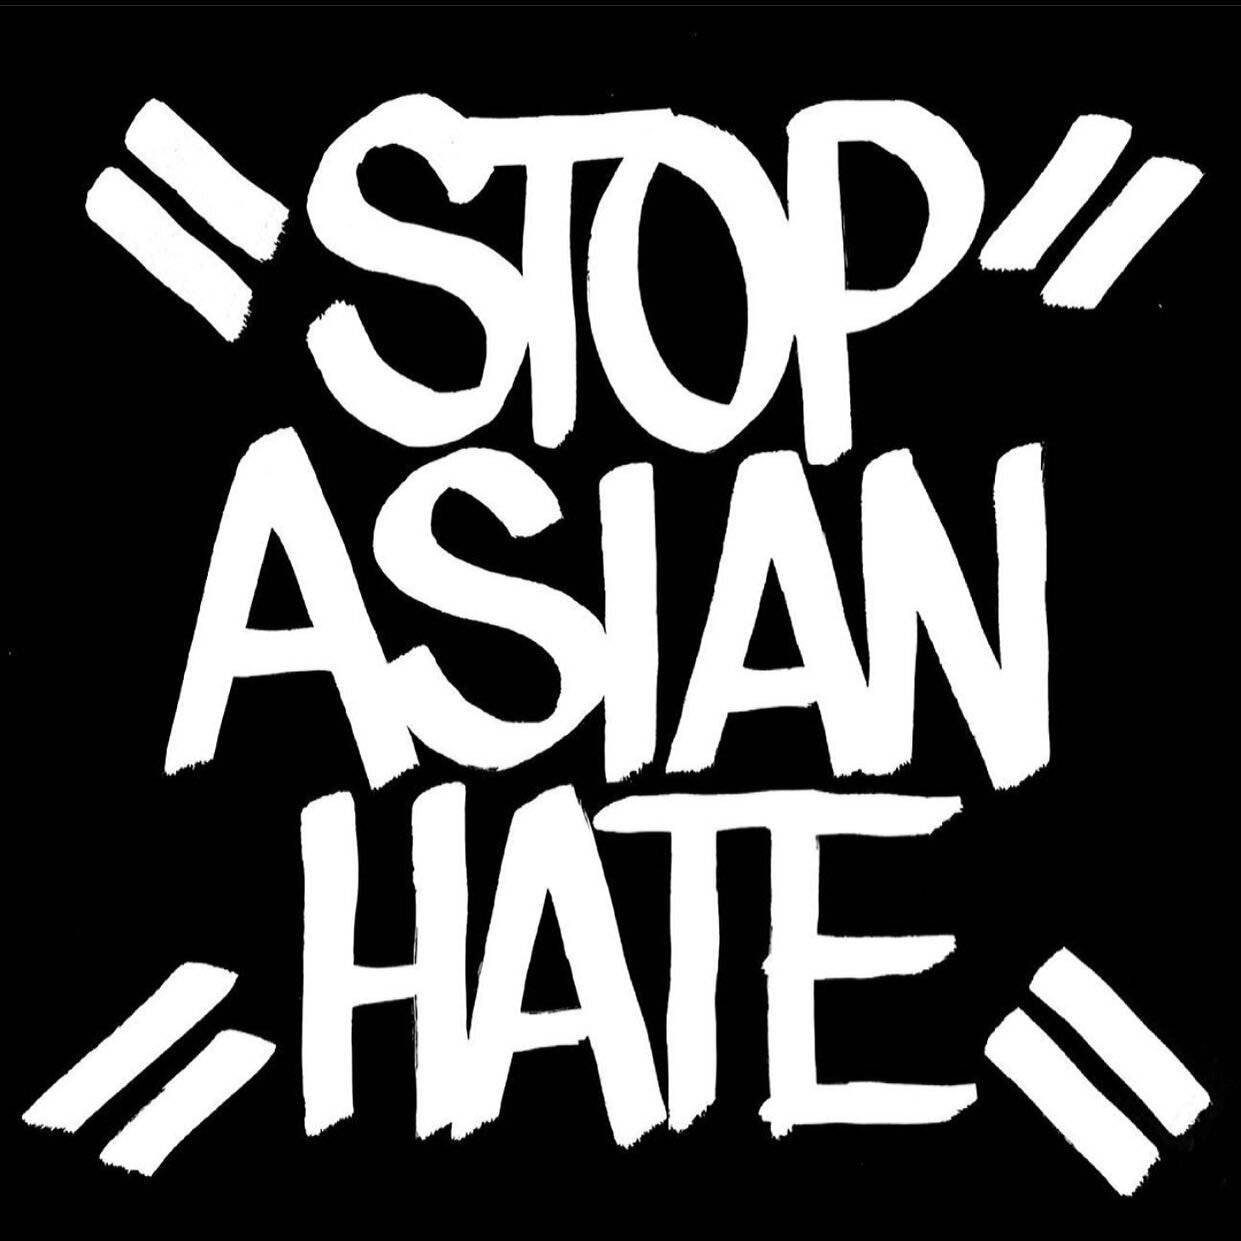 This bullshit has to stop. We as Asians will not stand for this nor will we be intimidated by your hate filled rhetoric and actions. Our hearts go out to those families affected by the Atlanta massacre. Shinsen proudly supports this message. #stopasi